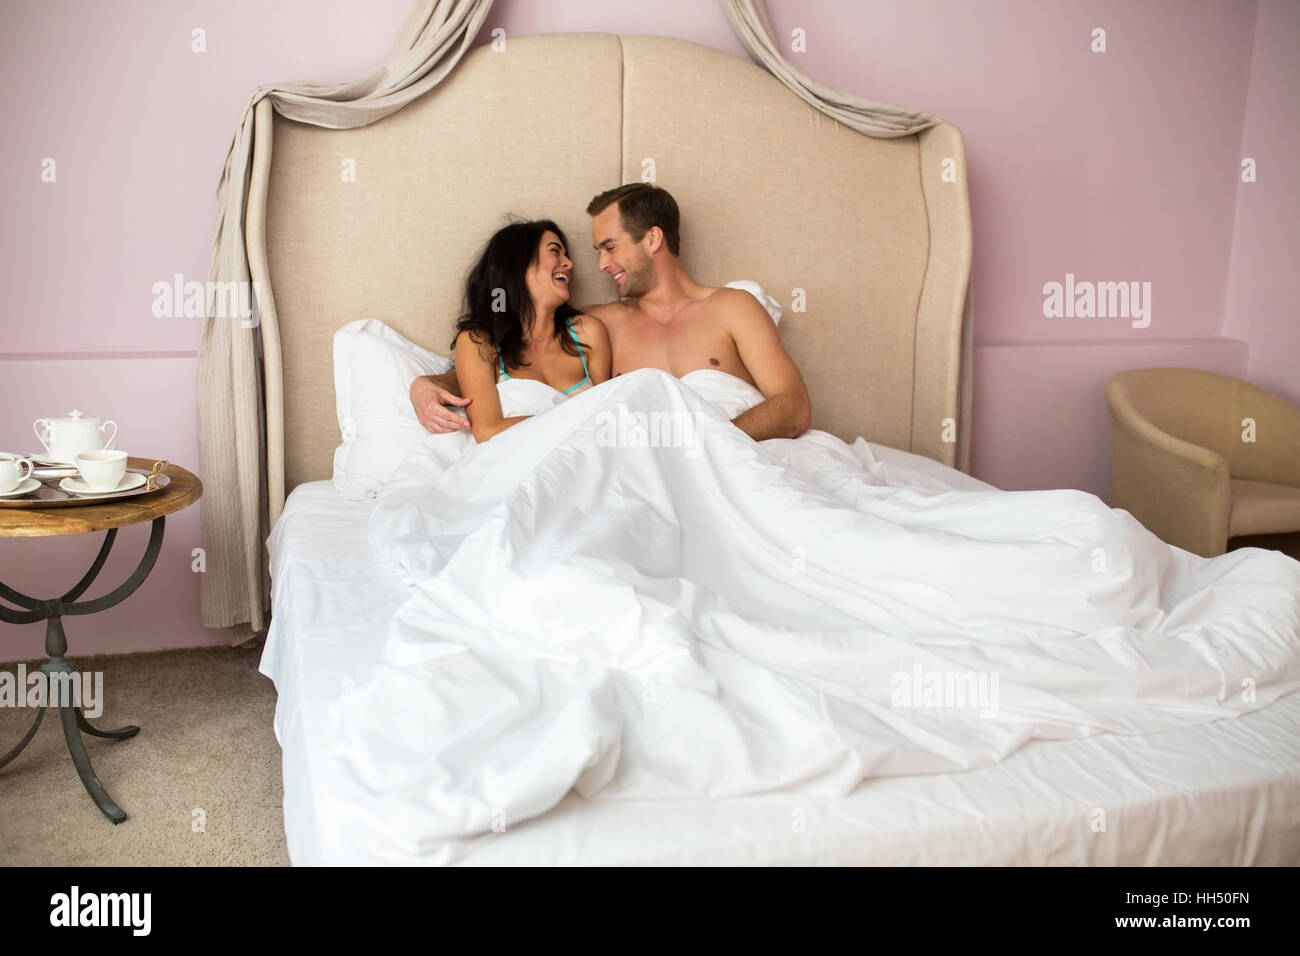 Couple in bed smiling. Stock Photo